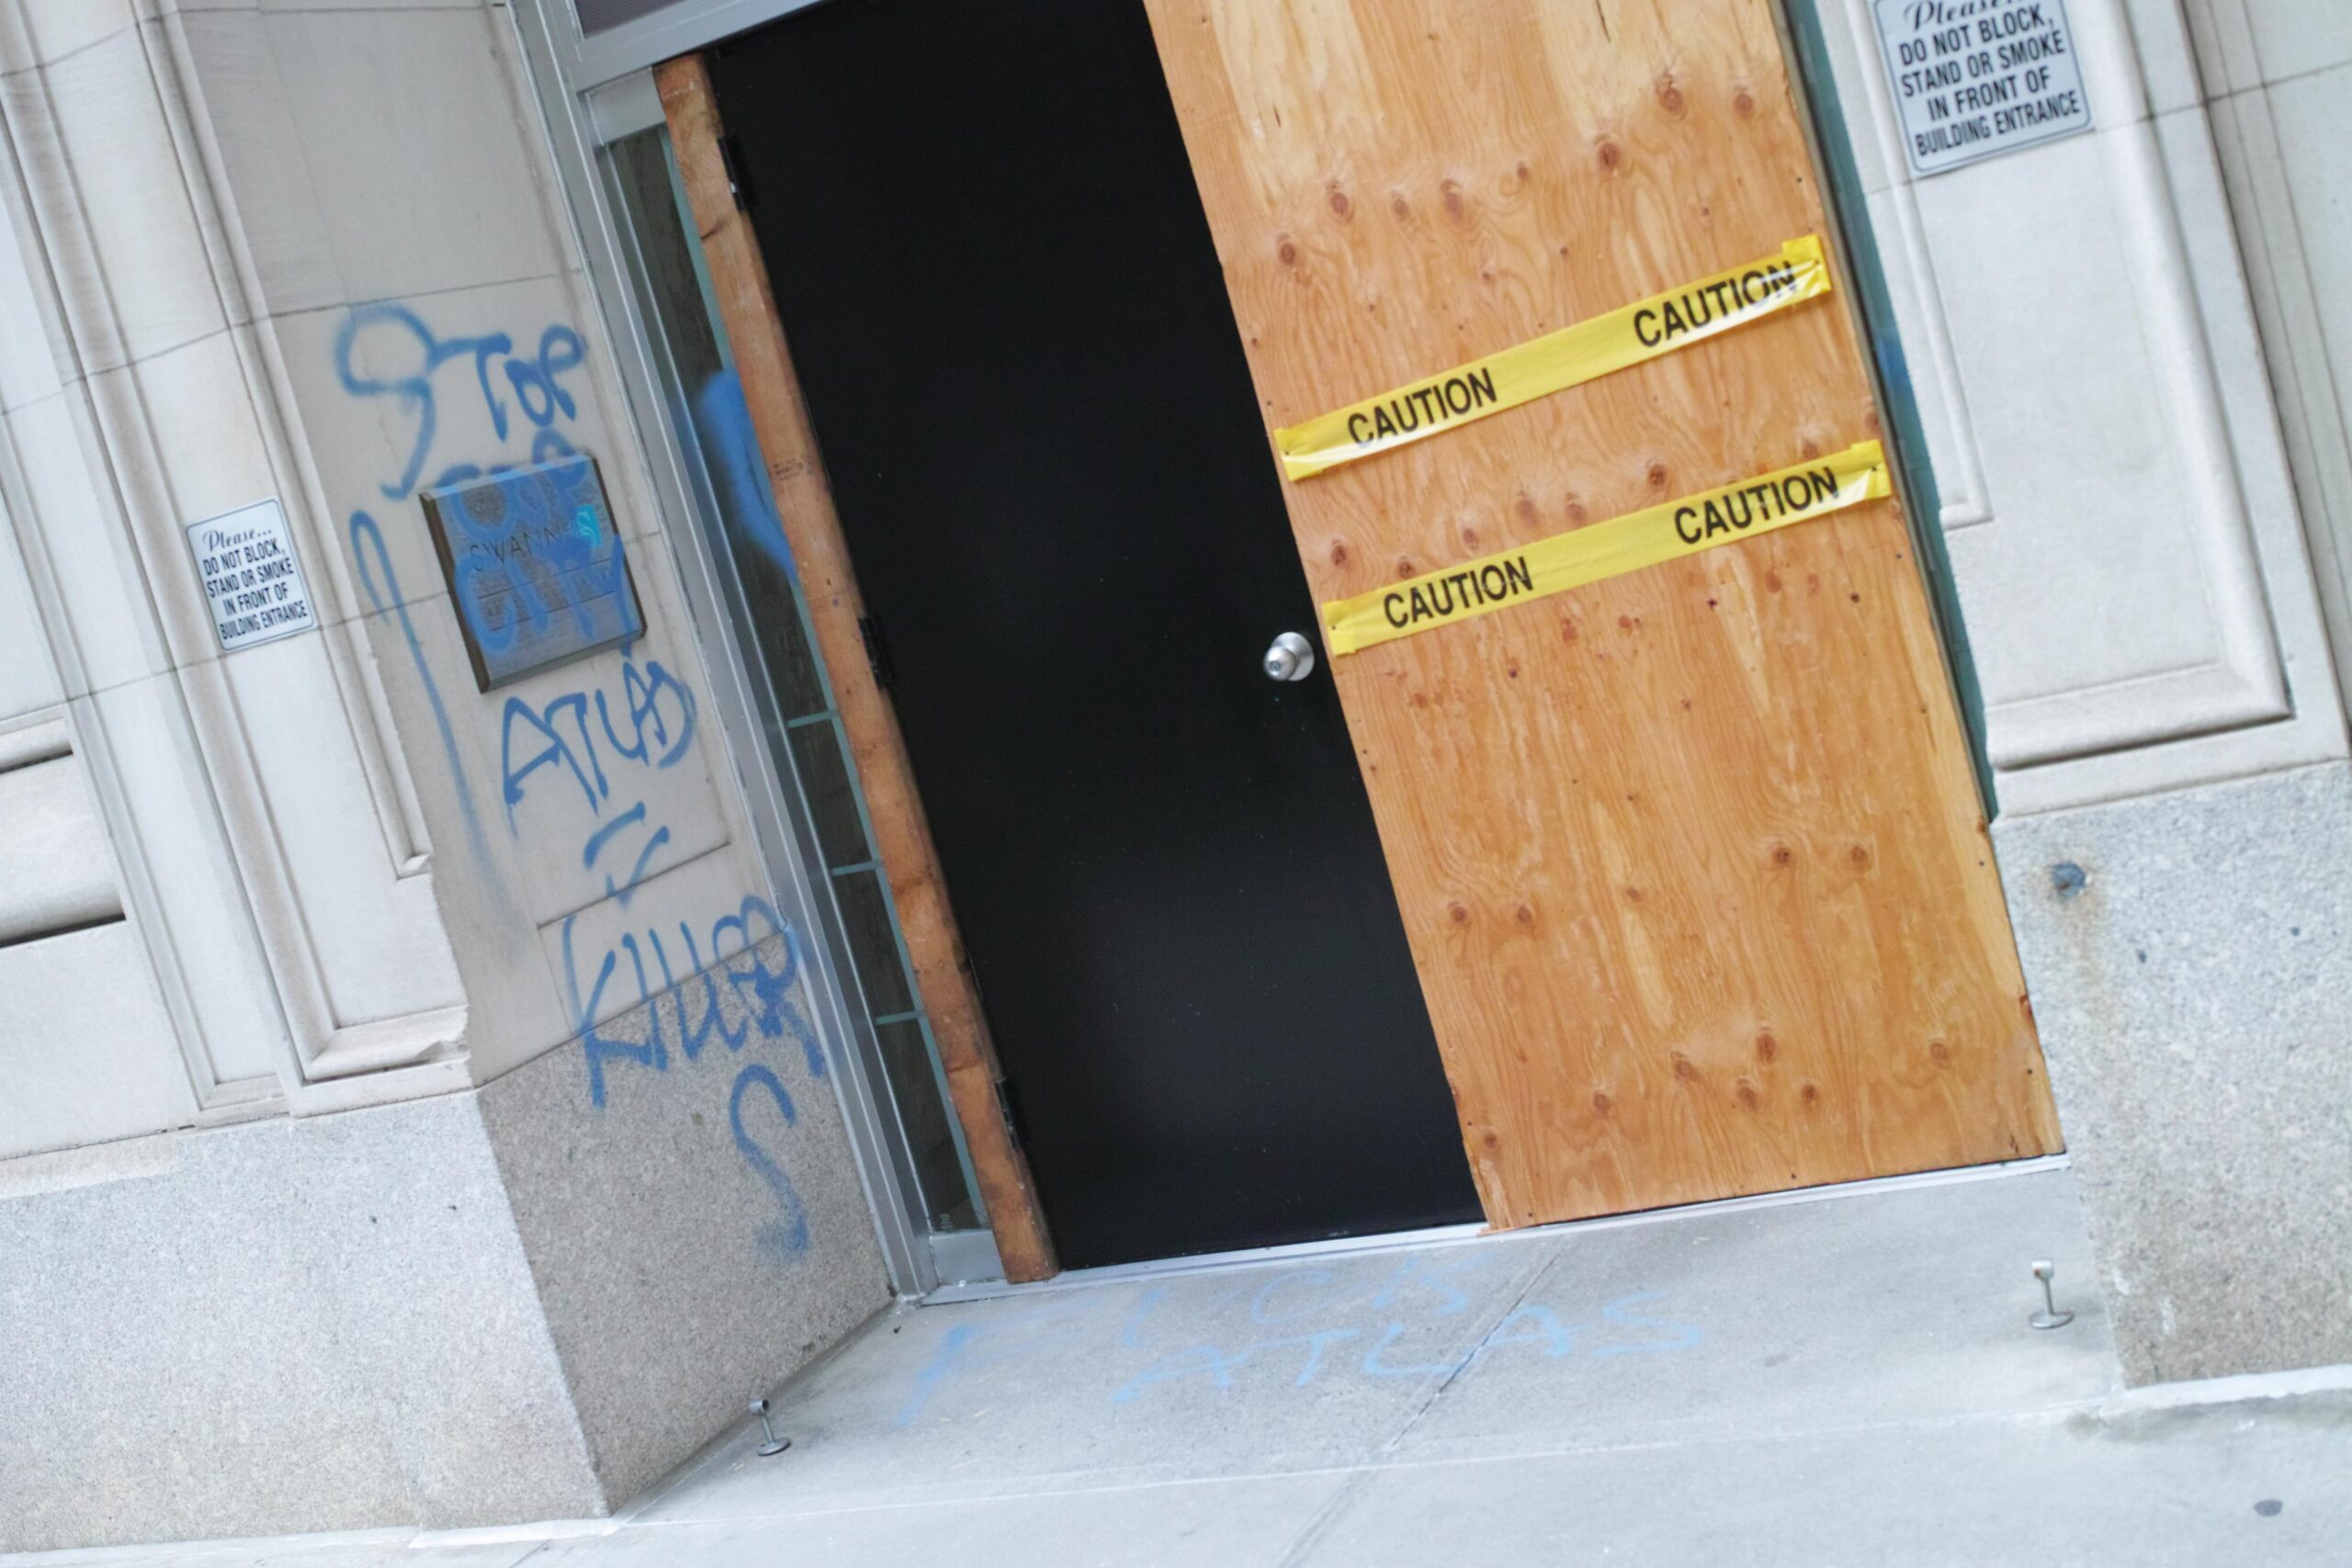 Onto a concrete wall, "STOP COP CITY ATLAS = KILLERS" is tagged in blue spray paint. On the sidewalk, "FUCK ATLAS" is also tagged in blue spray paint. A door next to the wall is covered in plywood and caution tape.